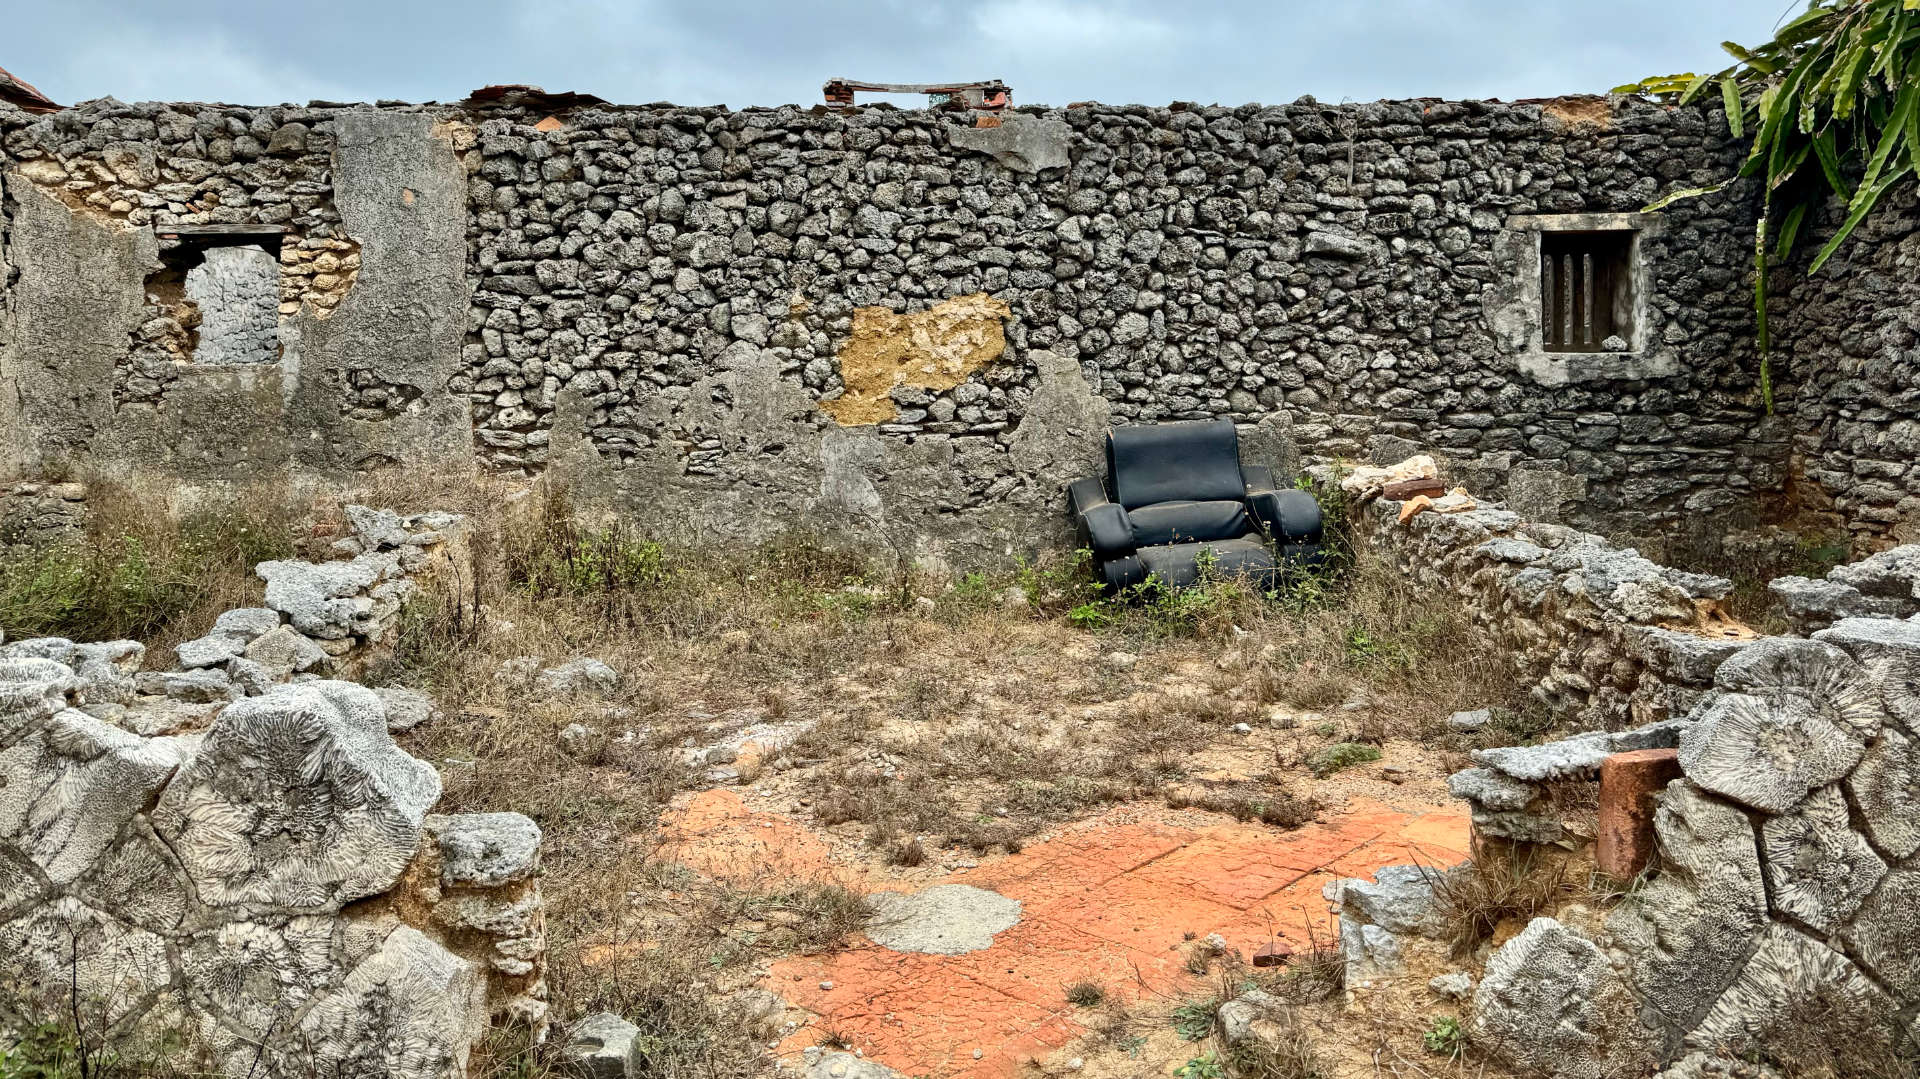 A roofless abandoned building made of coral. A vinyl armchair sits in one corner.